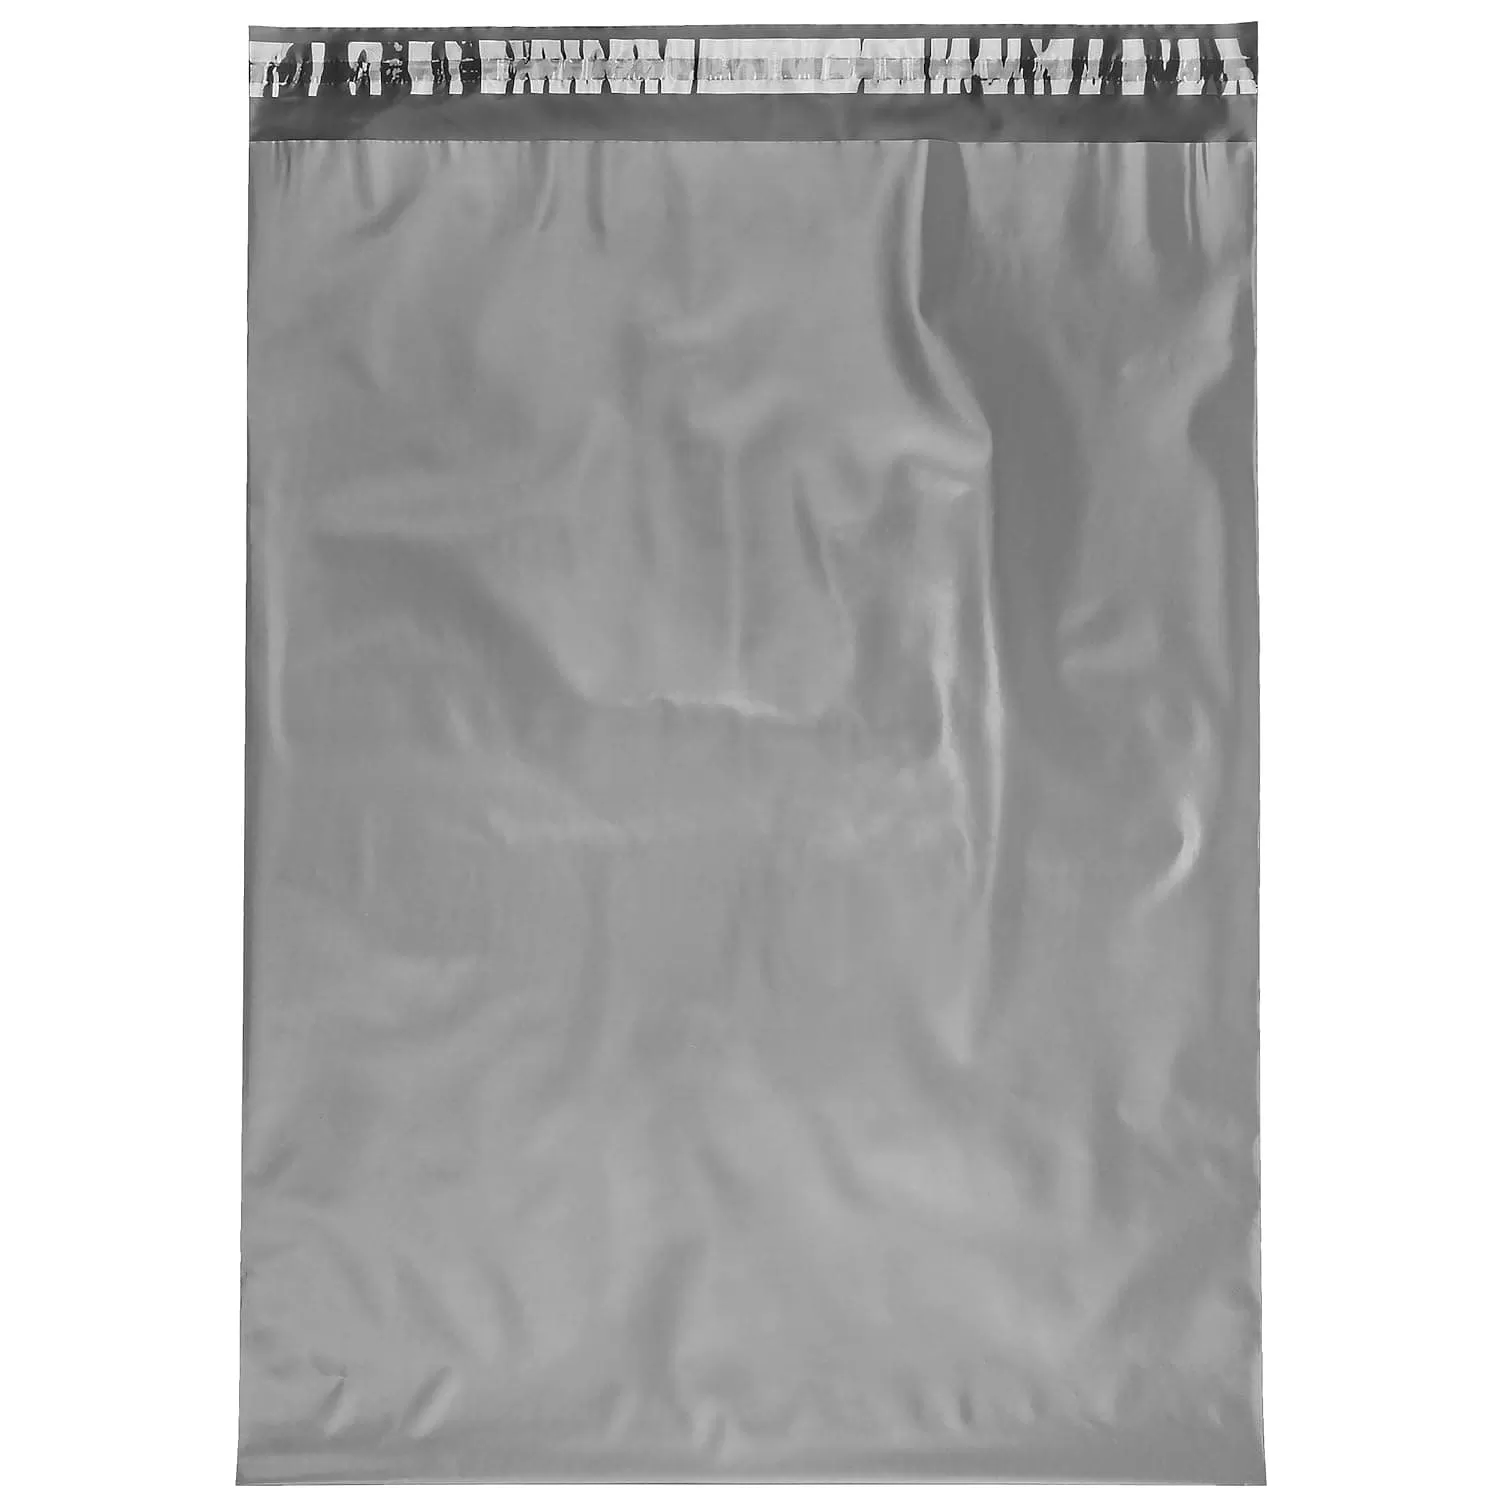 255mm x 330mm Grey Plastic Poly Bags Courier Shipping 